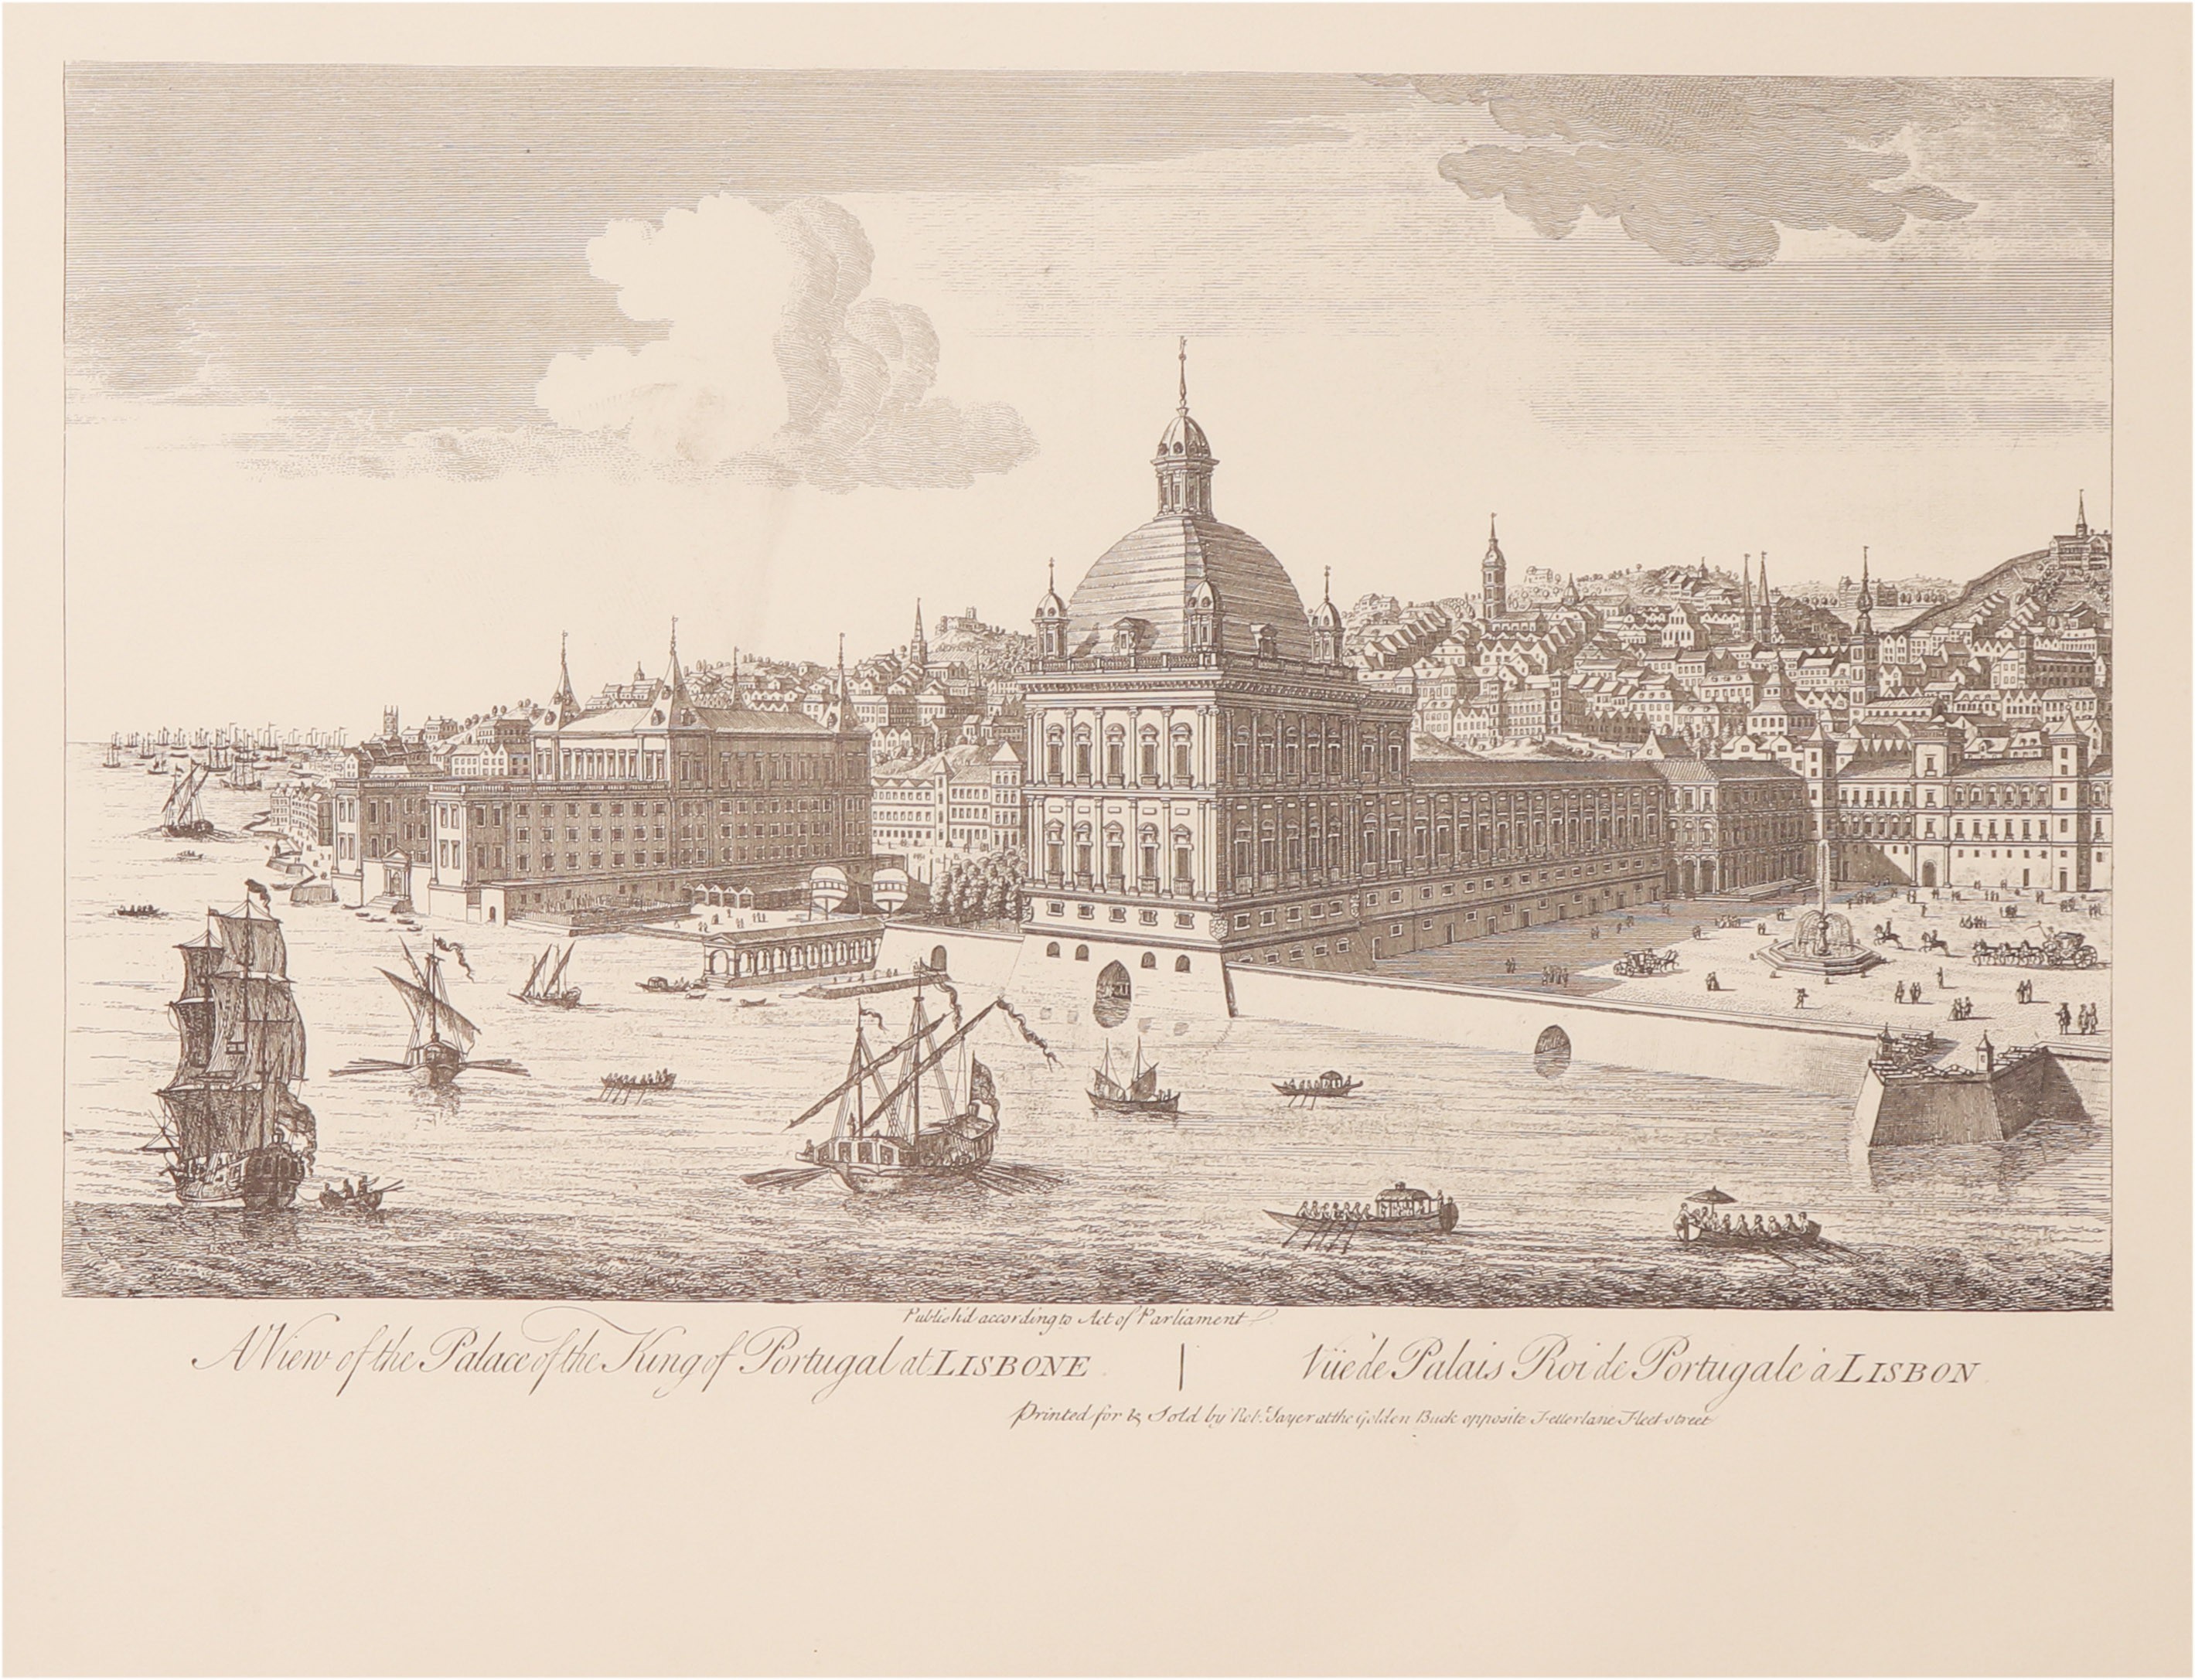 'A View of the Palace of the King of Portugal Lisbone'